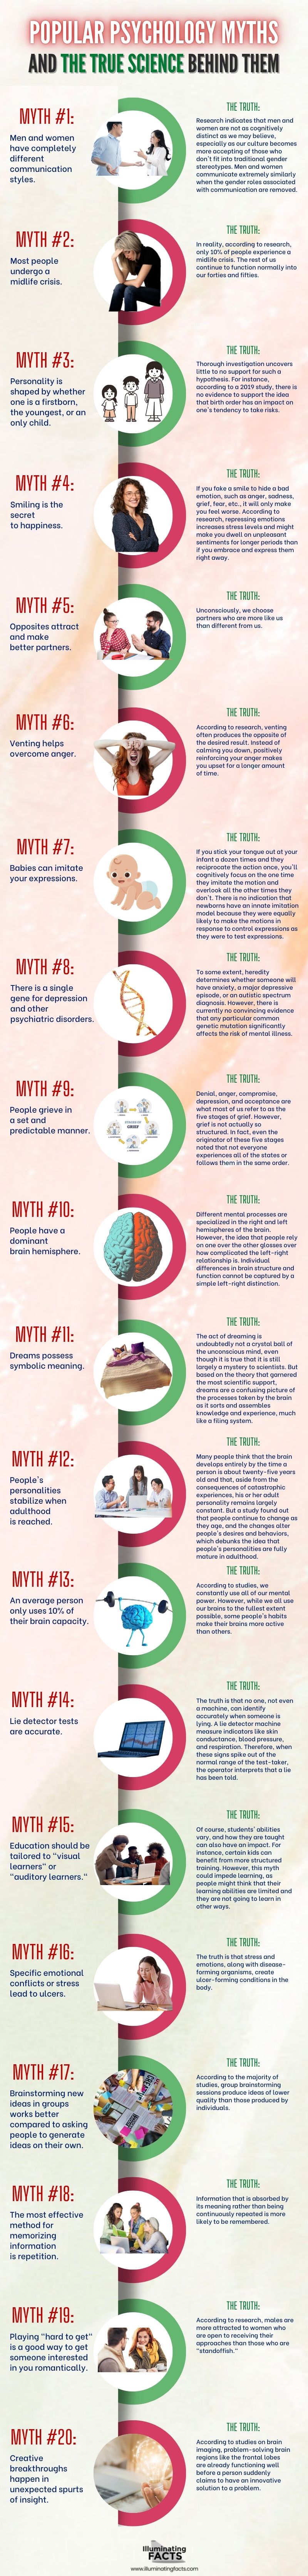 Popular Psychology Myths and the True Science Behind Them